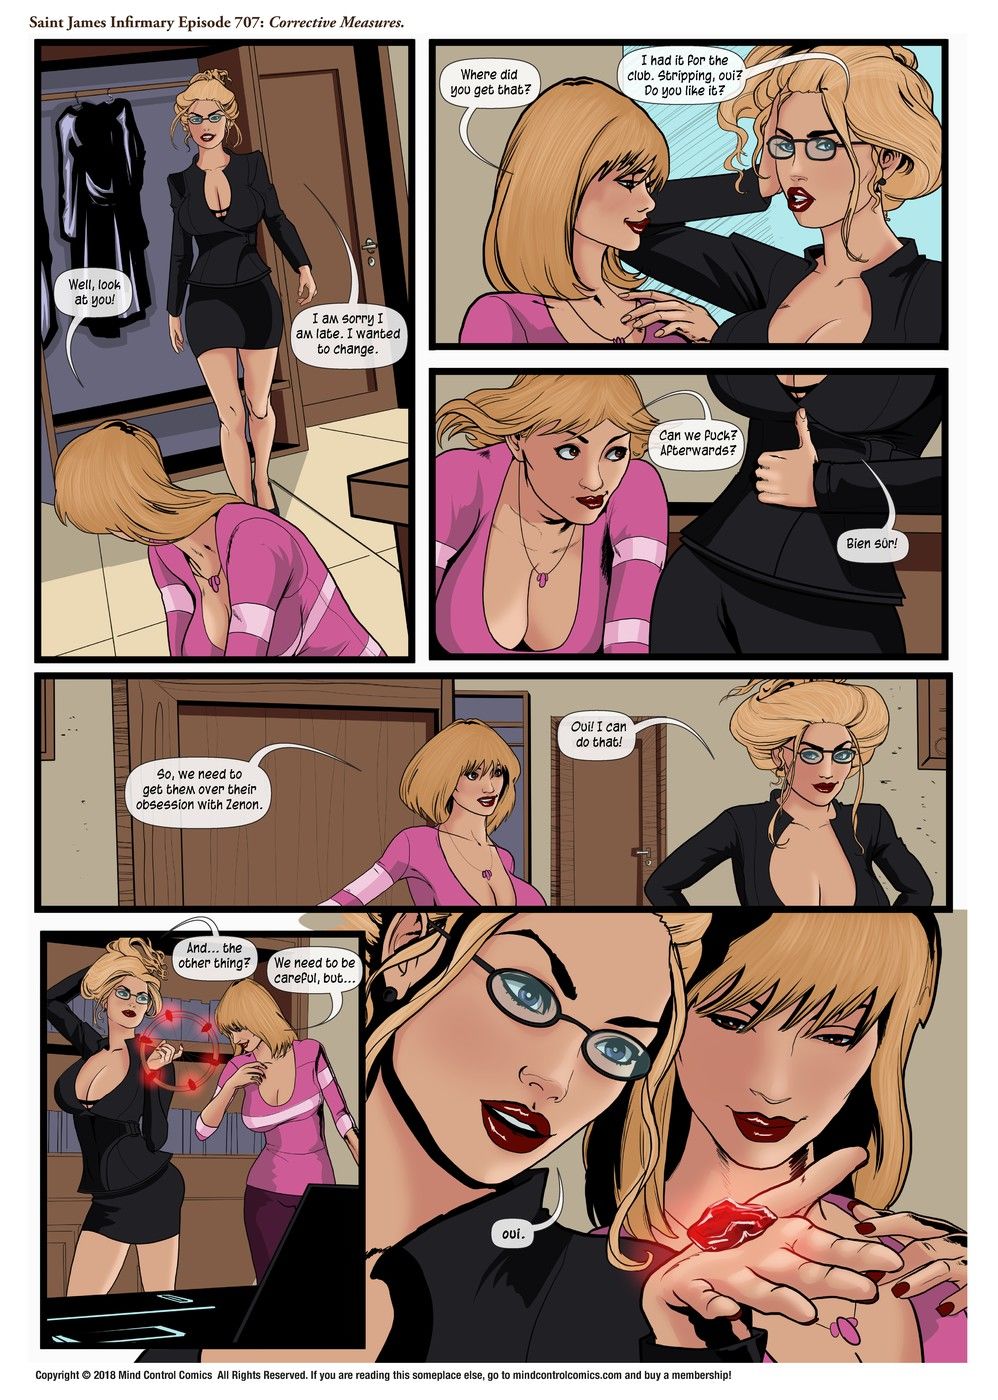 Saint James Infirmary Episode 701 page 7